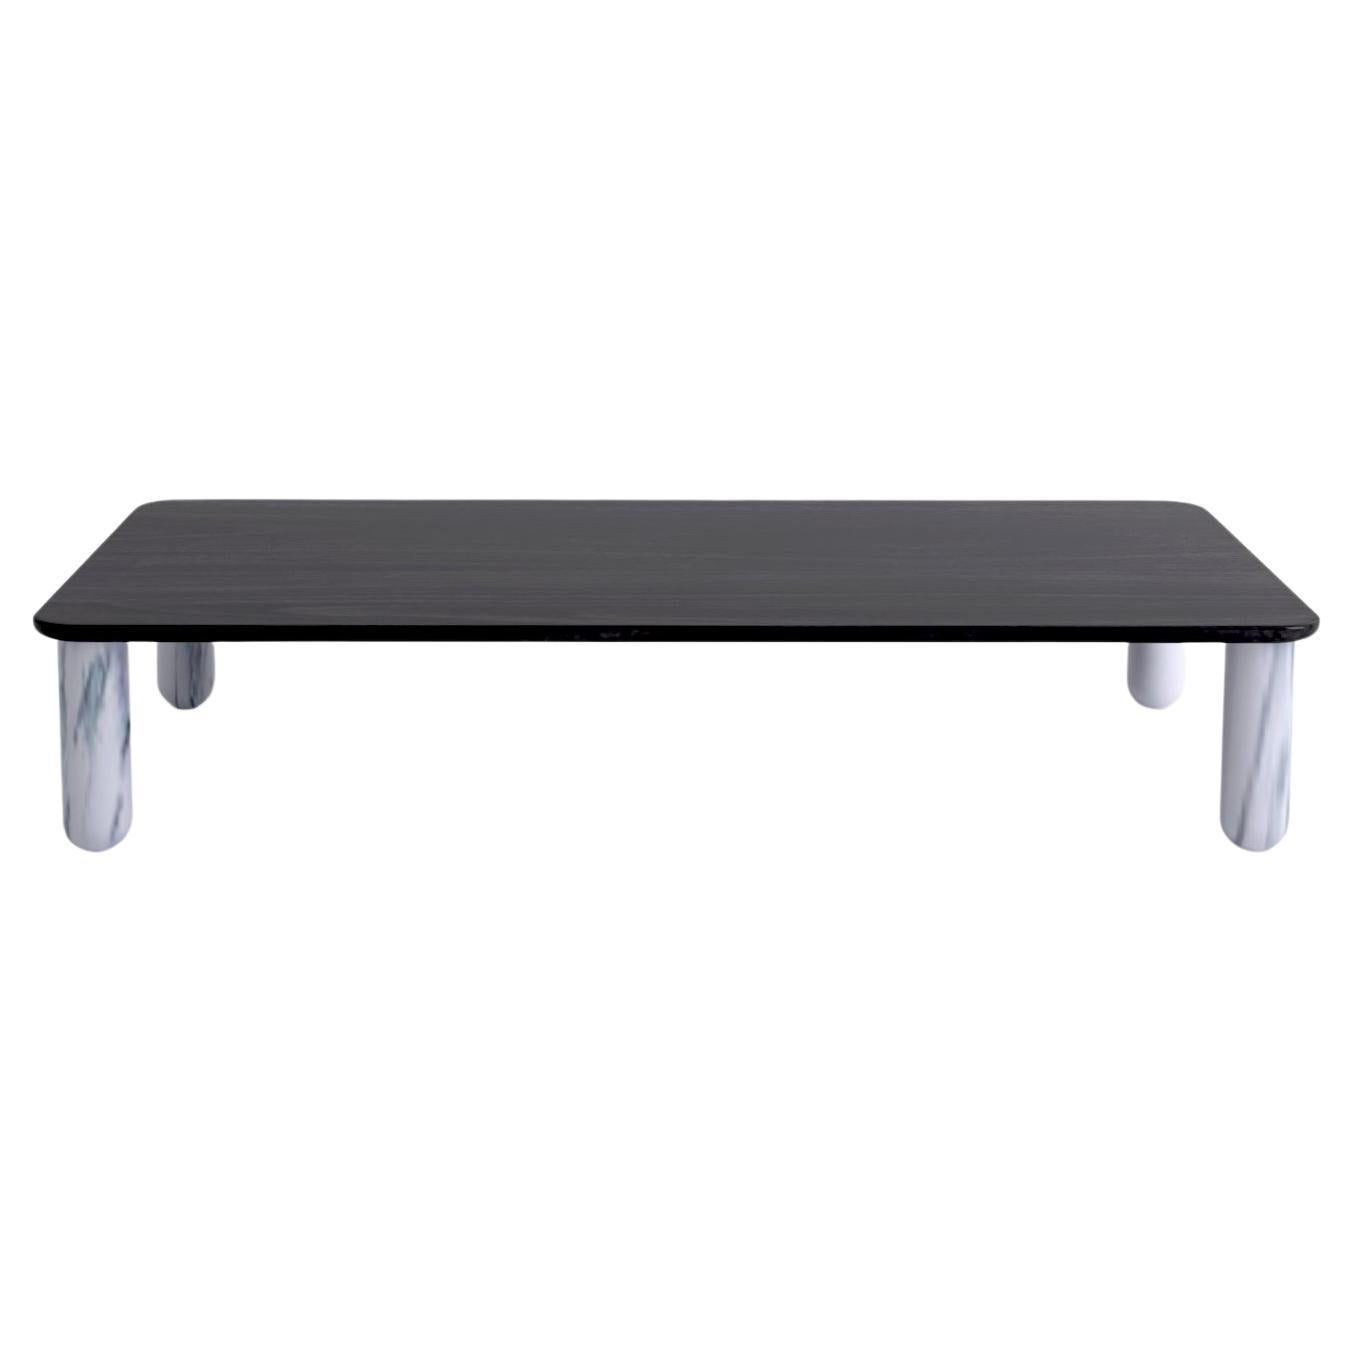 Xlarge Black Wood and White Marble "Sunday" Coffee Table, Jean-Baptiste Souletie For Sale